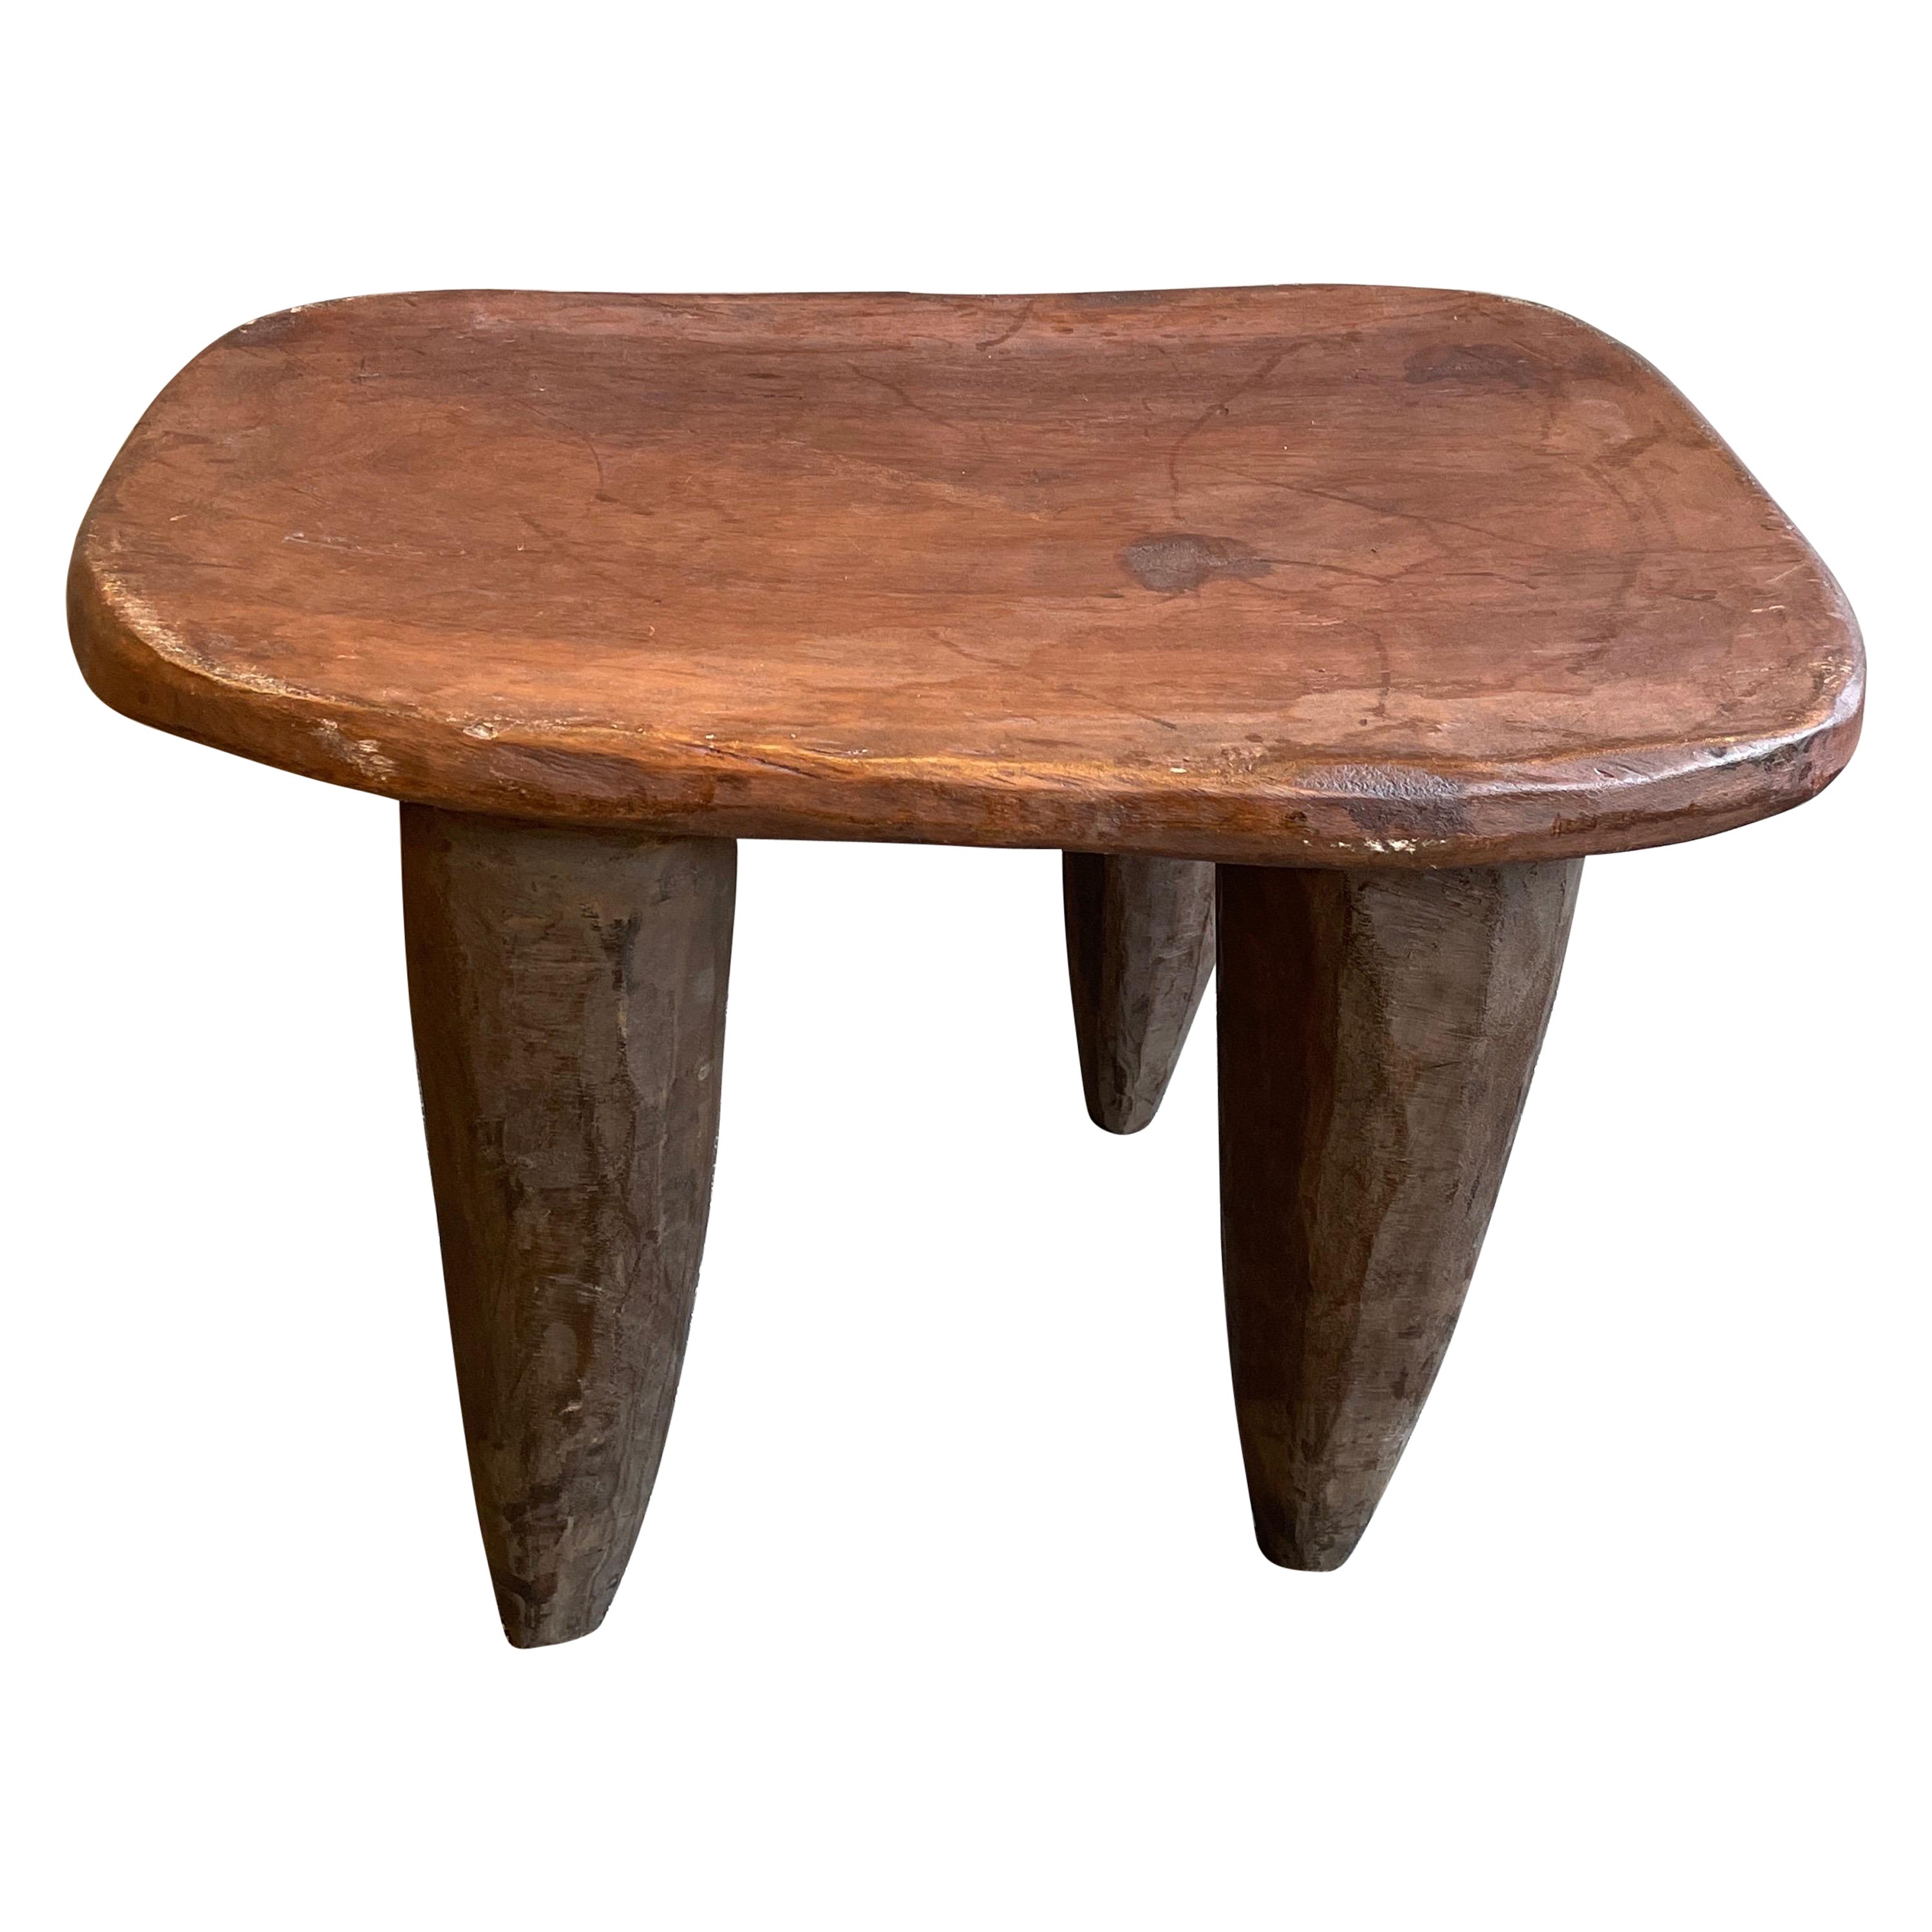 Senufo stool or side table from the Ivory Coast